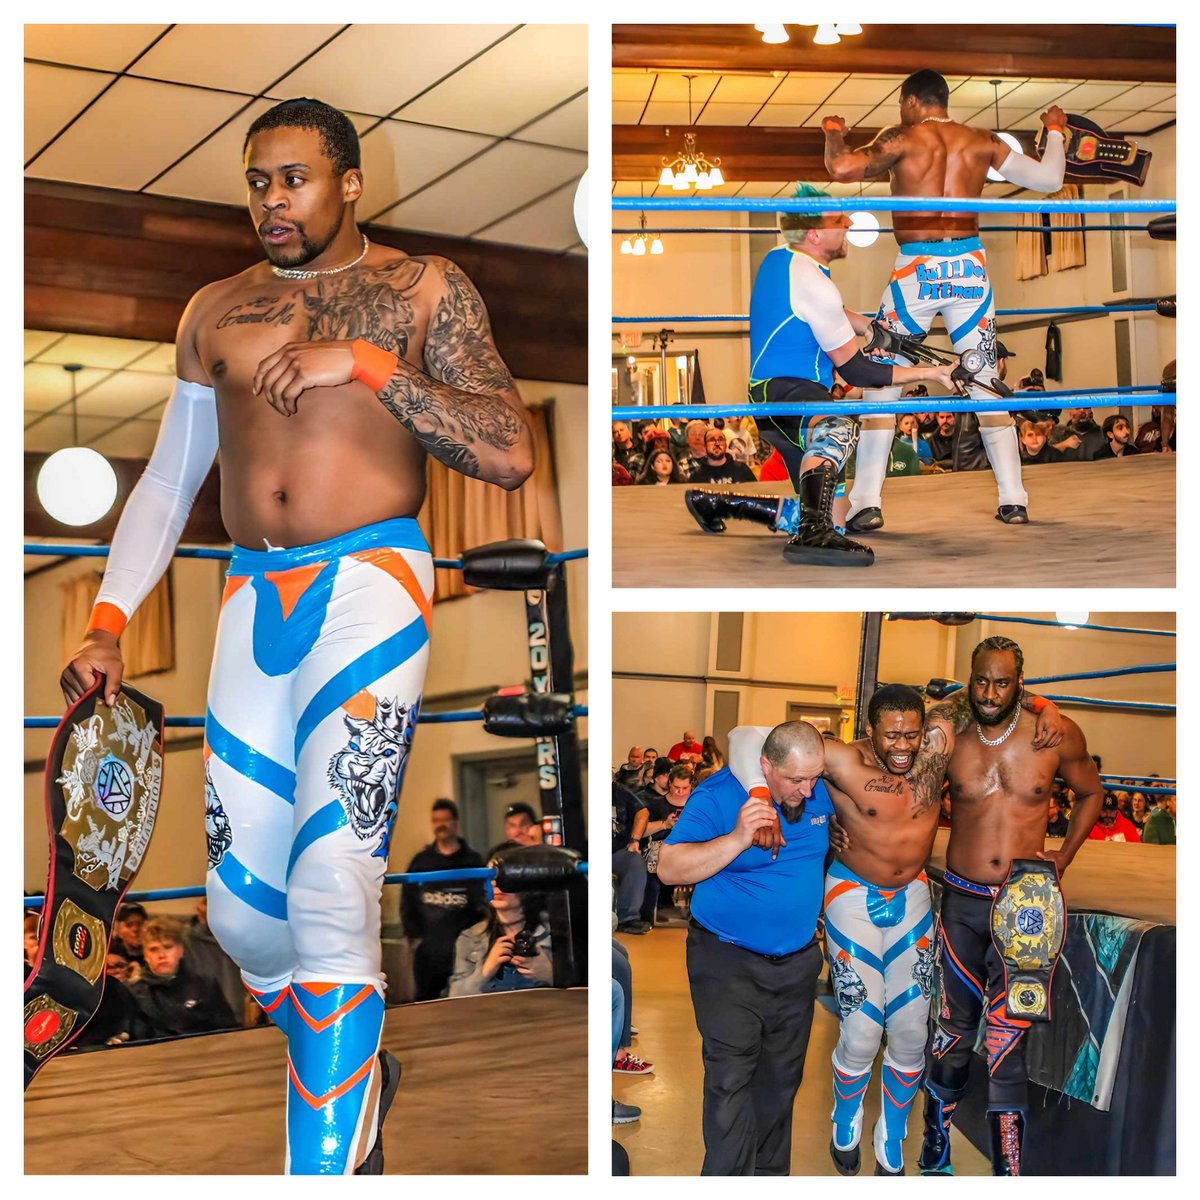 BREAKING NEWS - This past Saturday Night at Setting The Standard, UWA Elite Iron Man Champion Bulldog Pittman suffered a Grade 2 tear of his MCL (Medial Collateral Ligament) during a post match attack by Miles Thomas. As a result, Bulldog Pittman will not be medically cleared to…